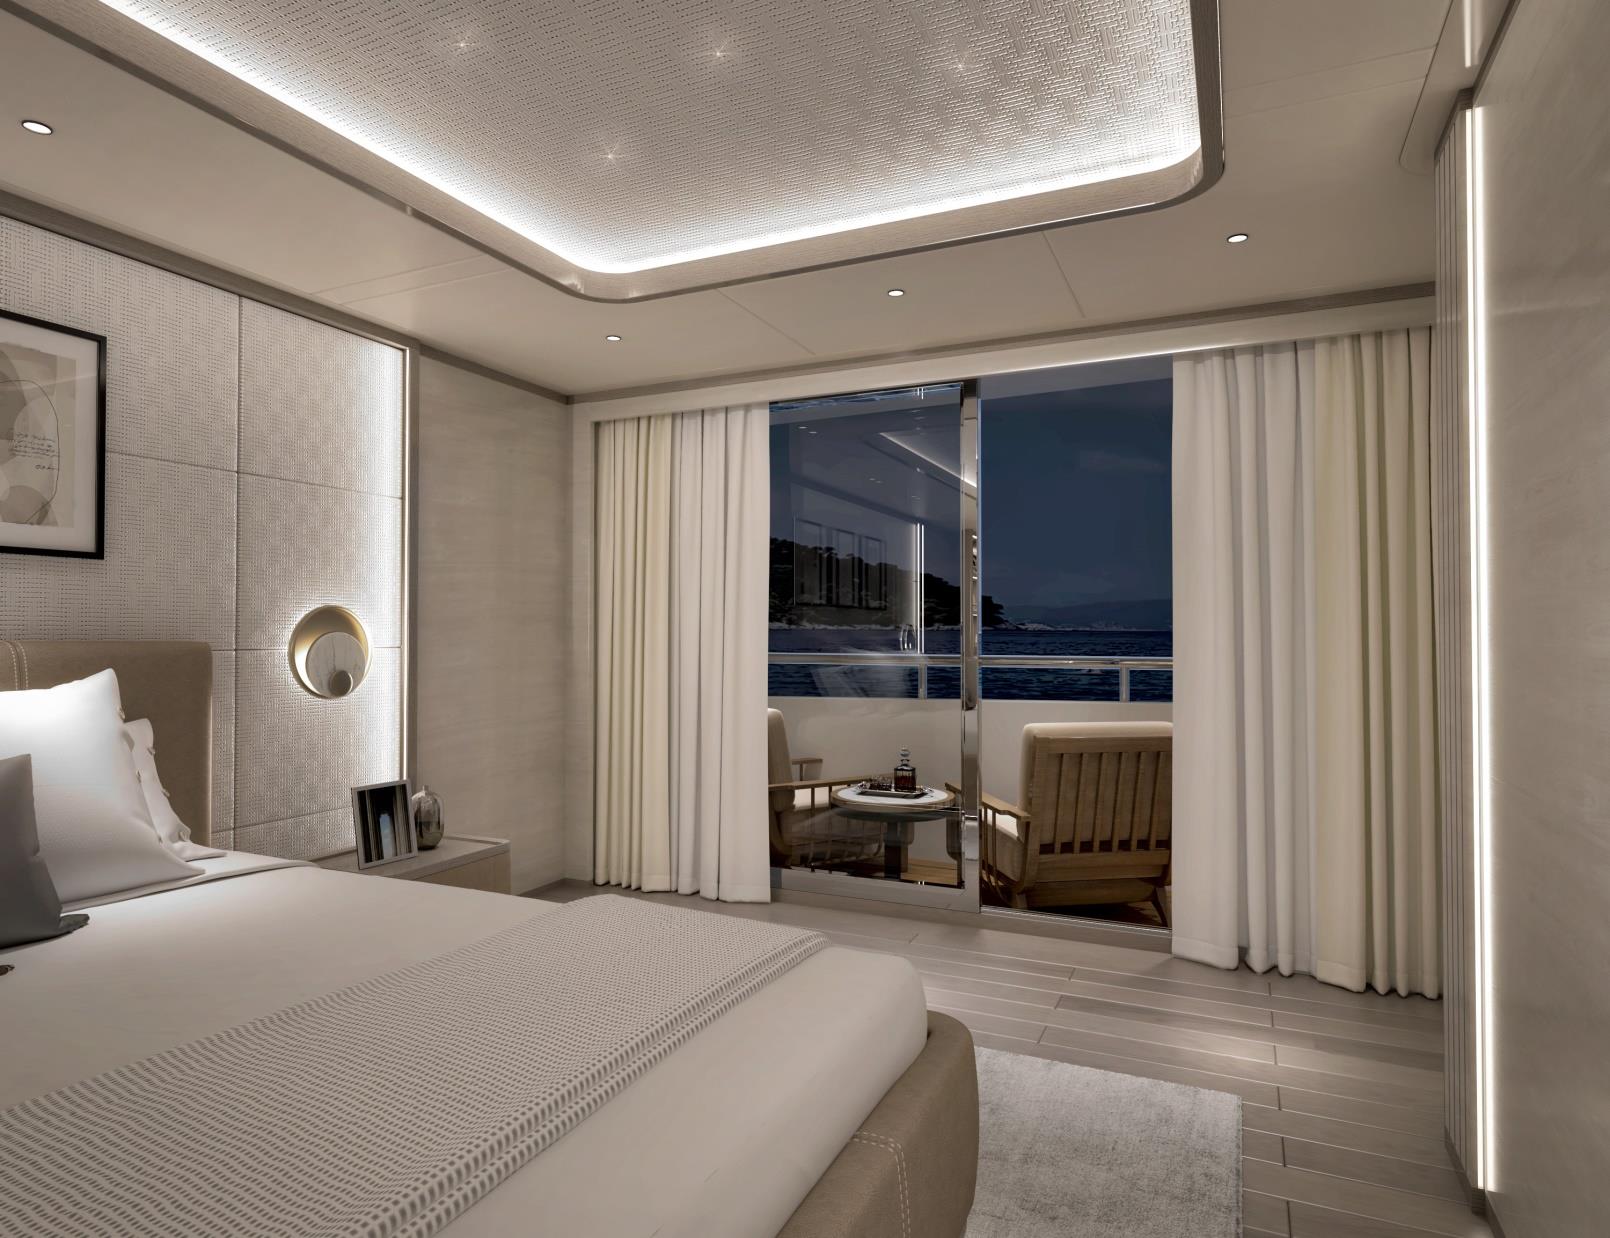 Master suite view to private balcony